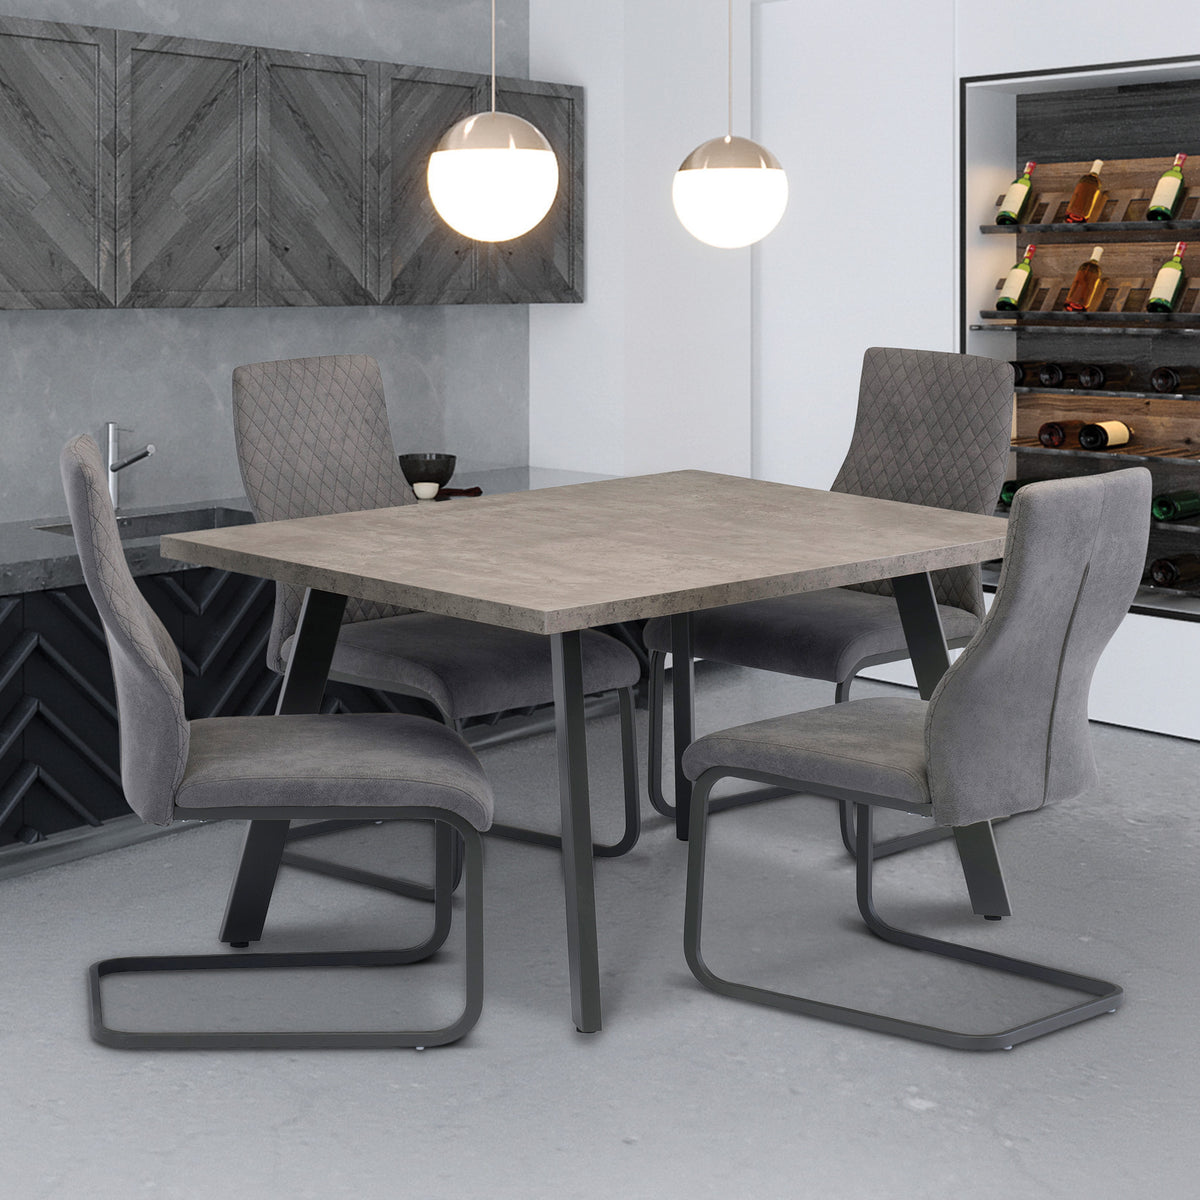 Parker Grey Concrete Effect 120cm Rectangular Dining Table from Roseland for dining room